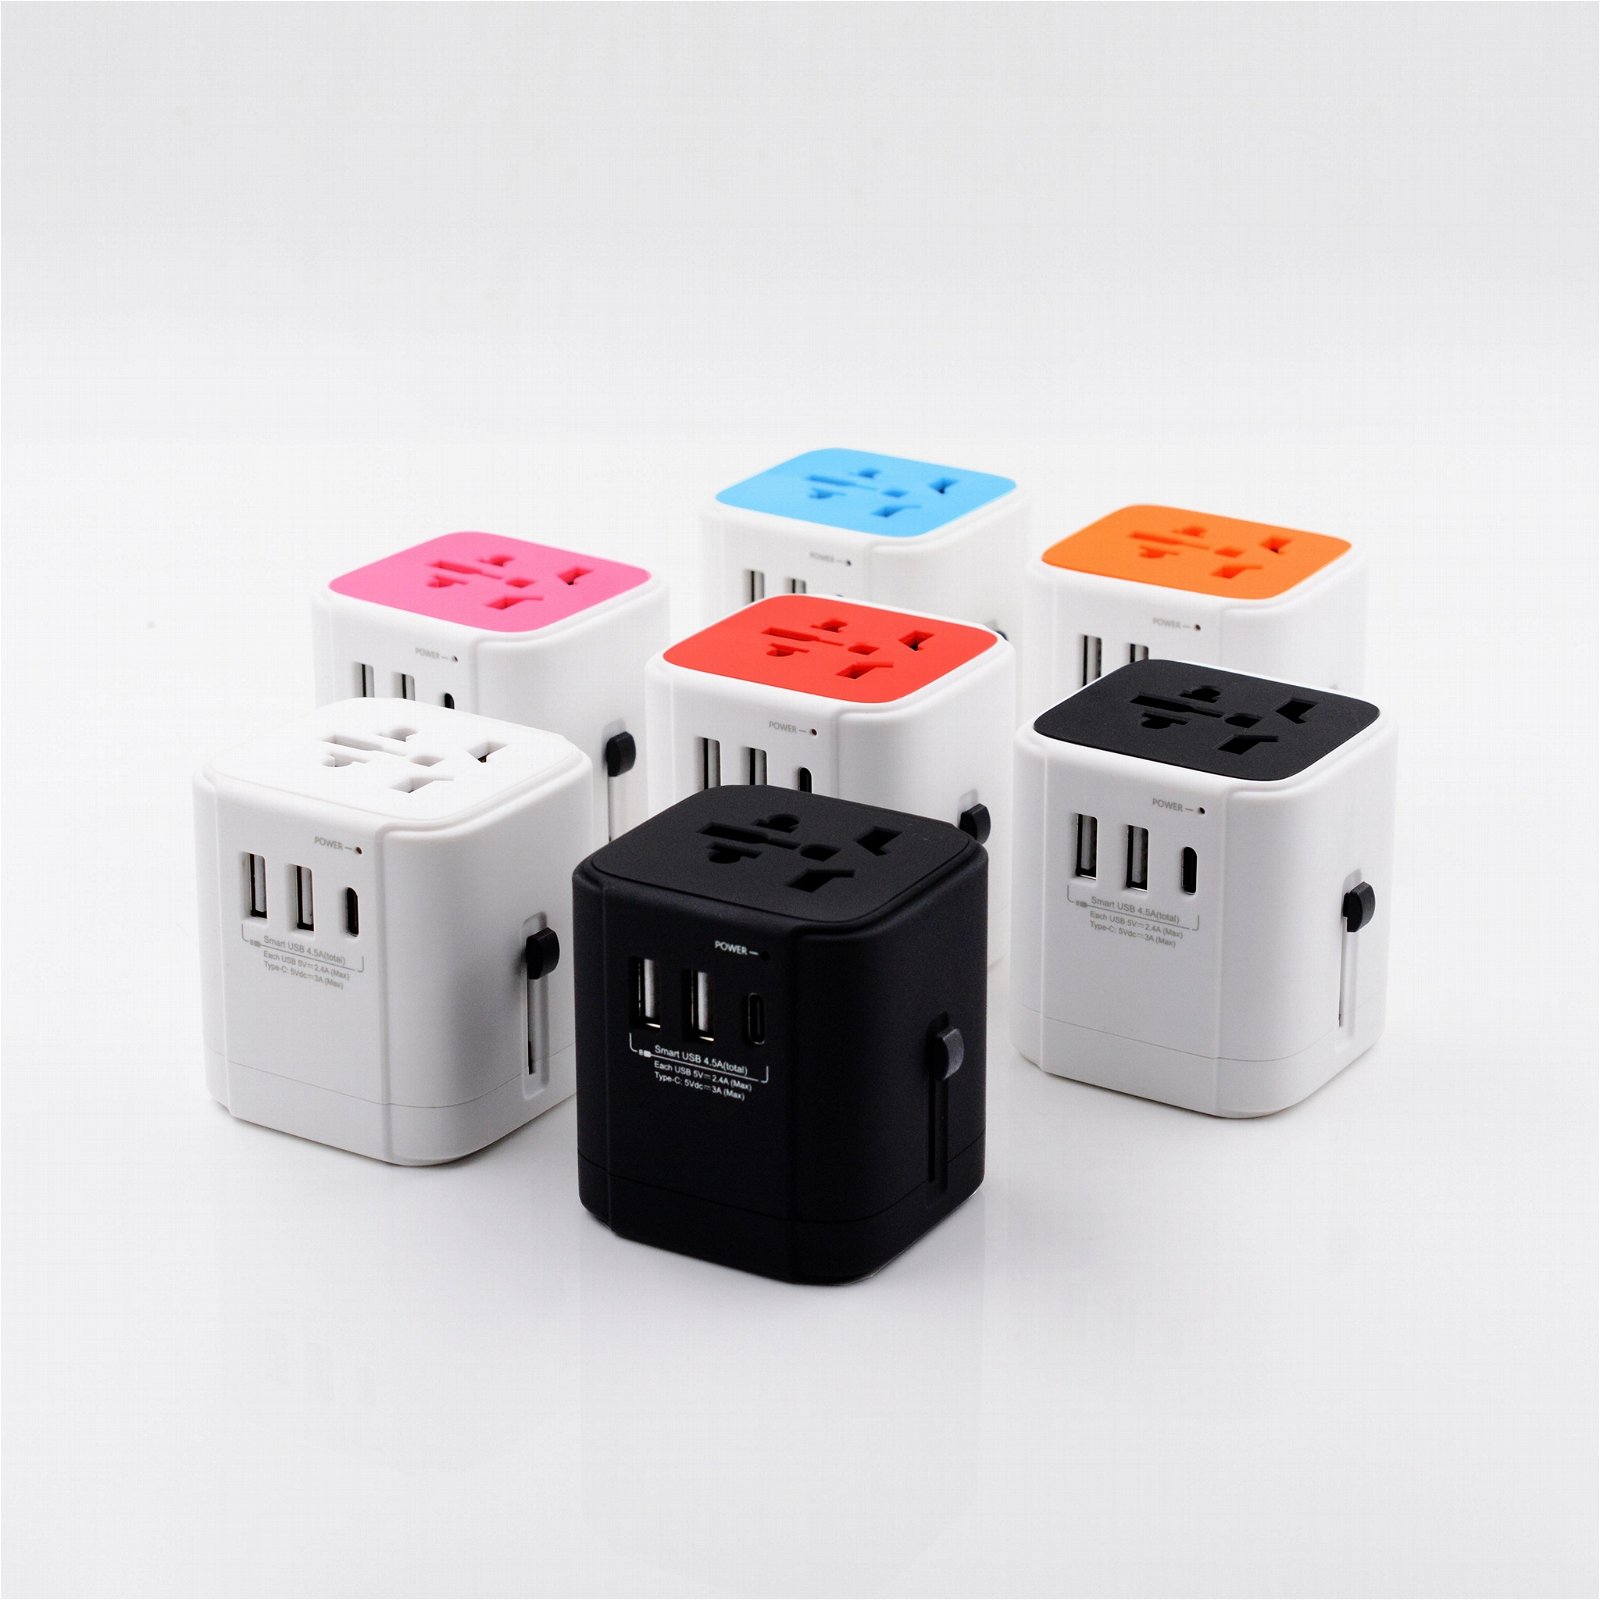 2019 gift promotion travel adapter with Taye C USB 4.5A plug adapter  3